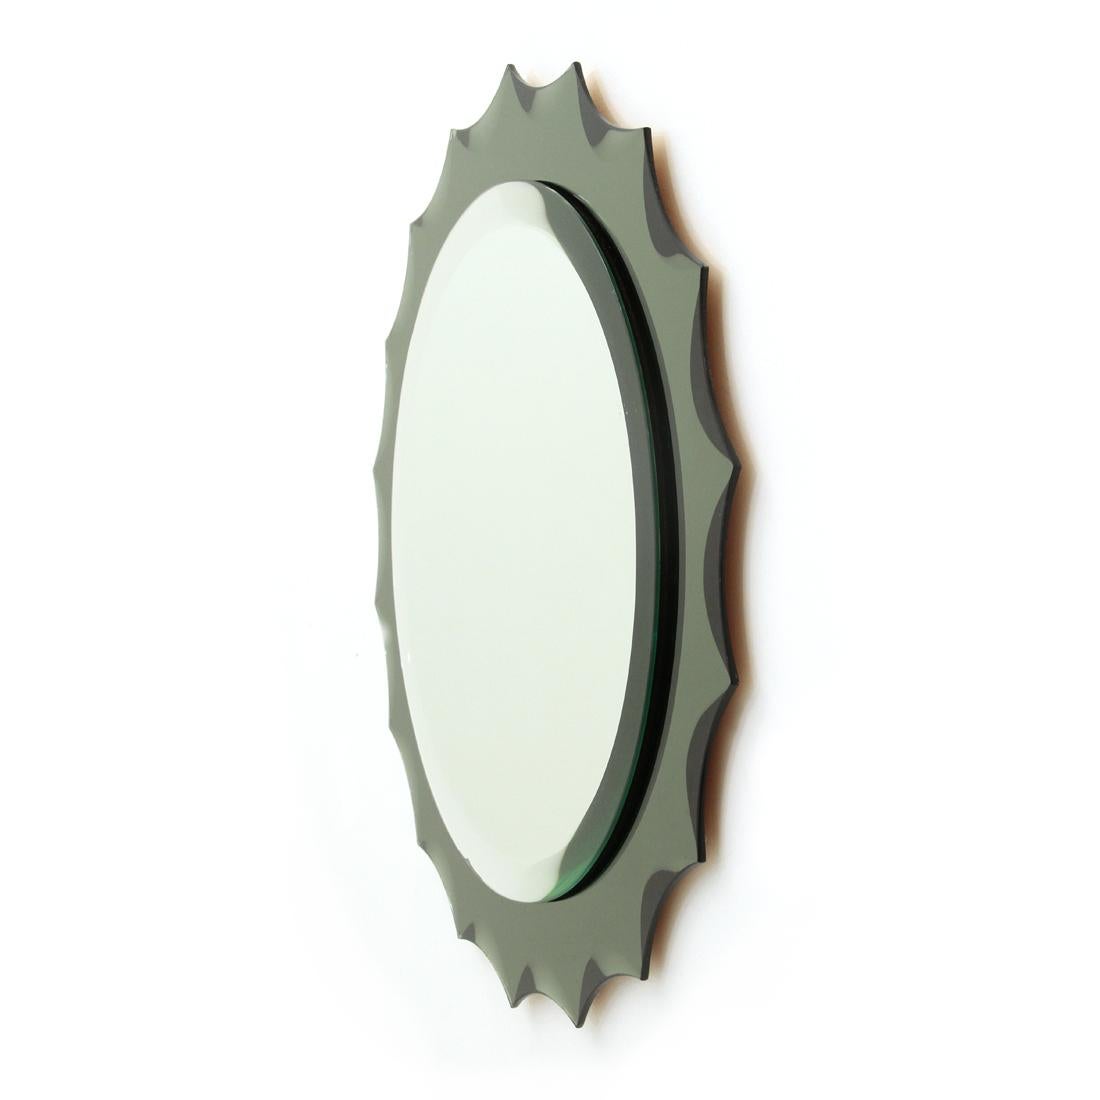 Italian manufacturing mirror produced in the 1970s.
Smoked mirror frame in the shape of sun with bevelled edges.
Circular mirror with bevelled edge.
Good general conditions, some signs due to normal use over time.

Dimensions: Diameter 67 cm -